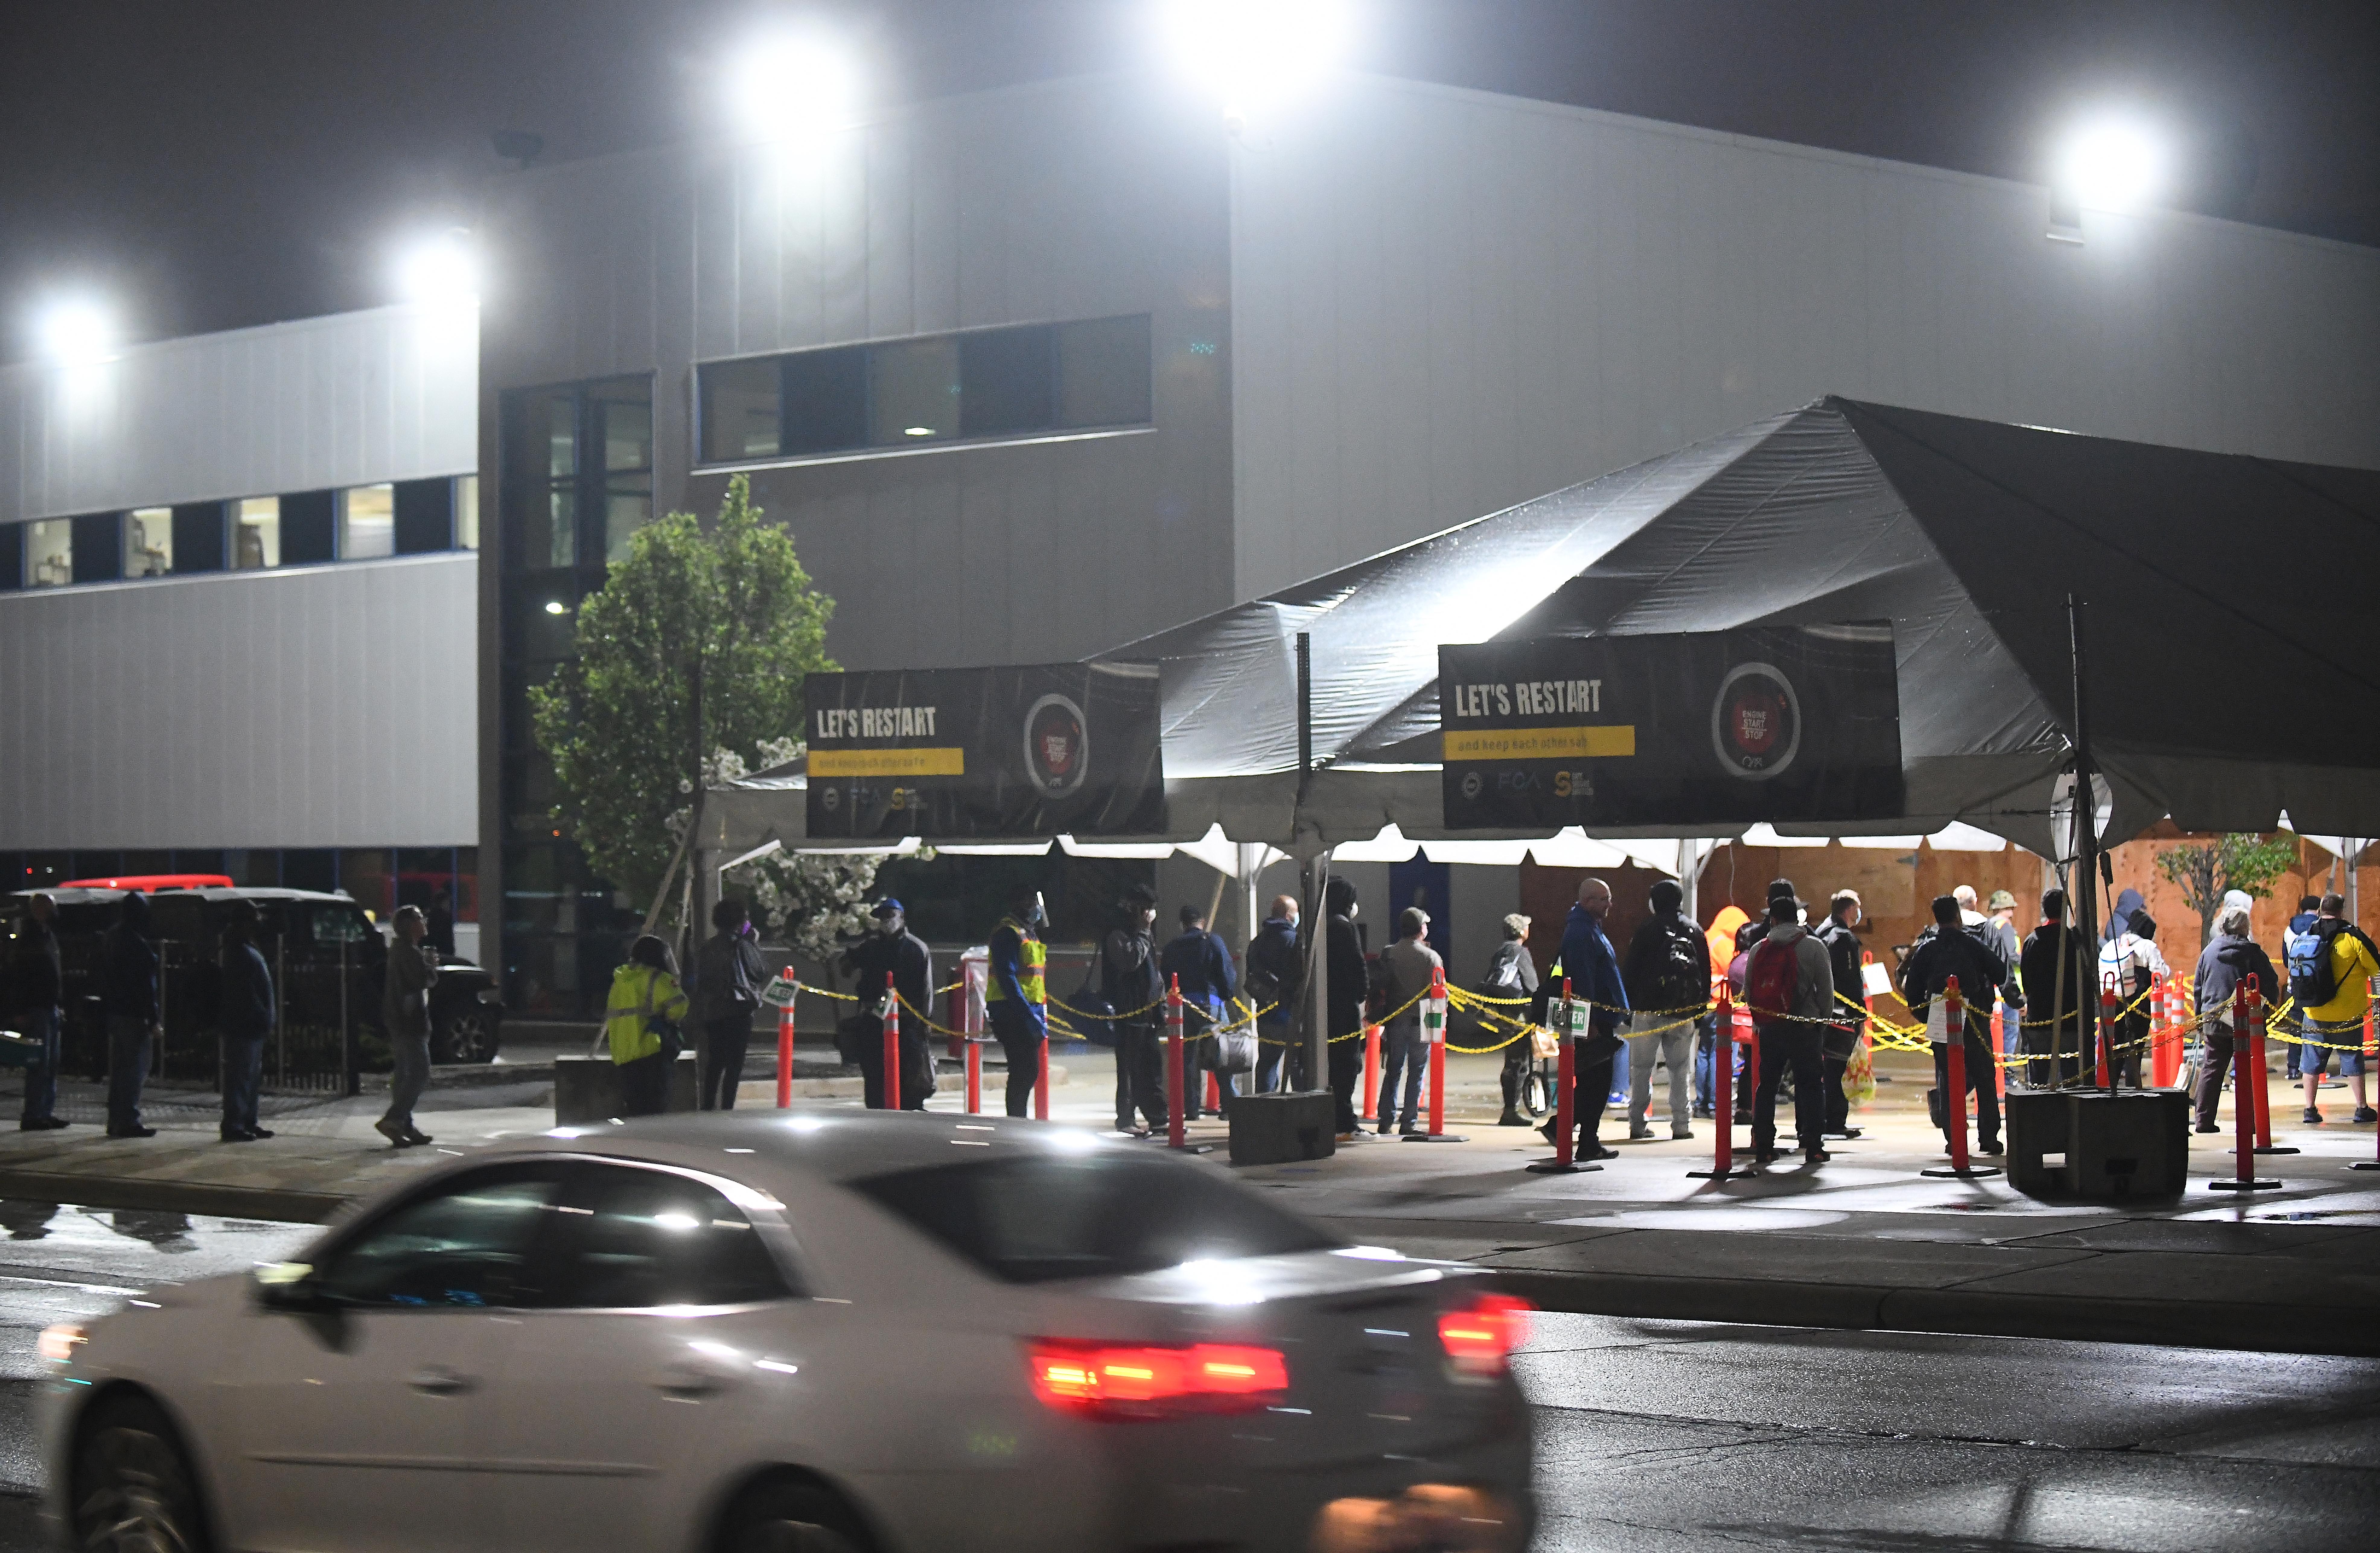 Employees wait in line at 4 a.m. as they arrive at the employee entrance at FCA Warren Truck Assembly in Warren, Michigan, on Monday, May 18, 2020.